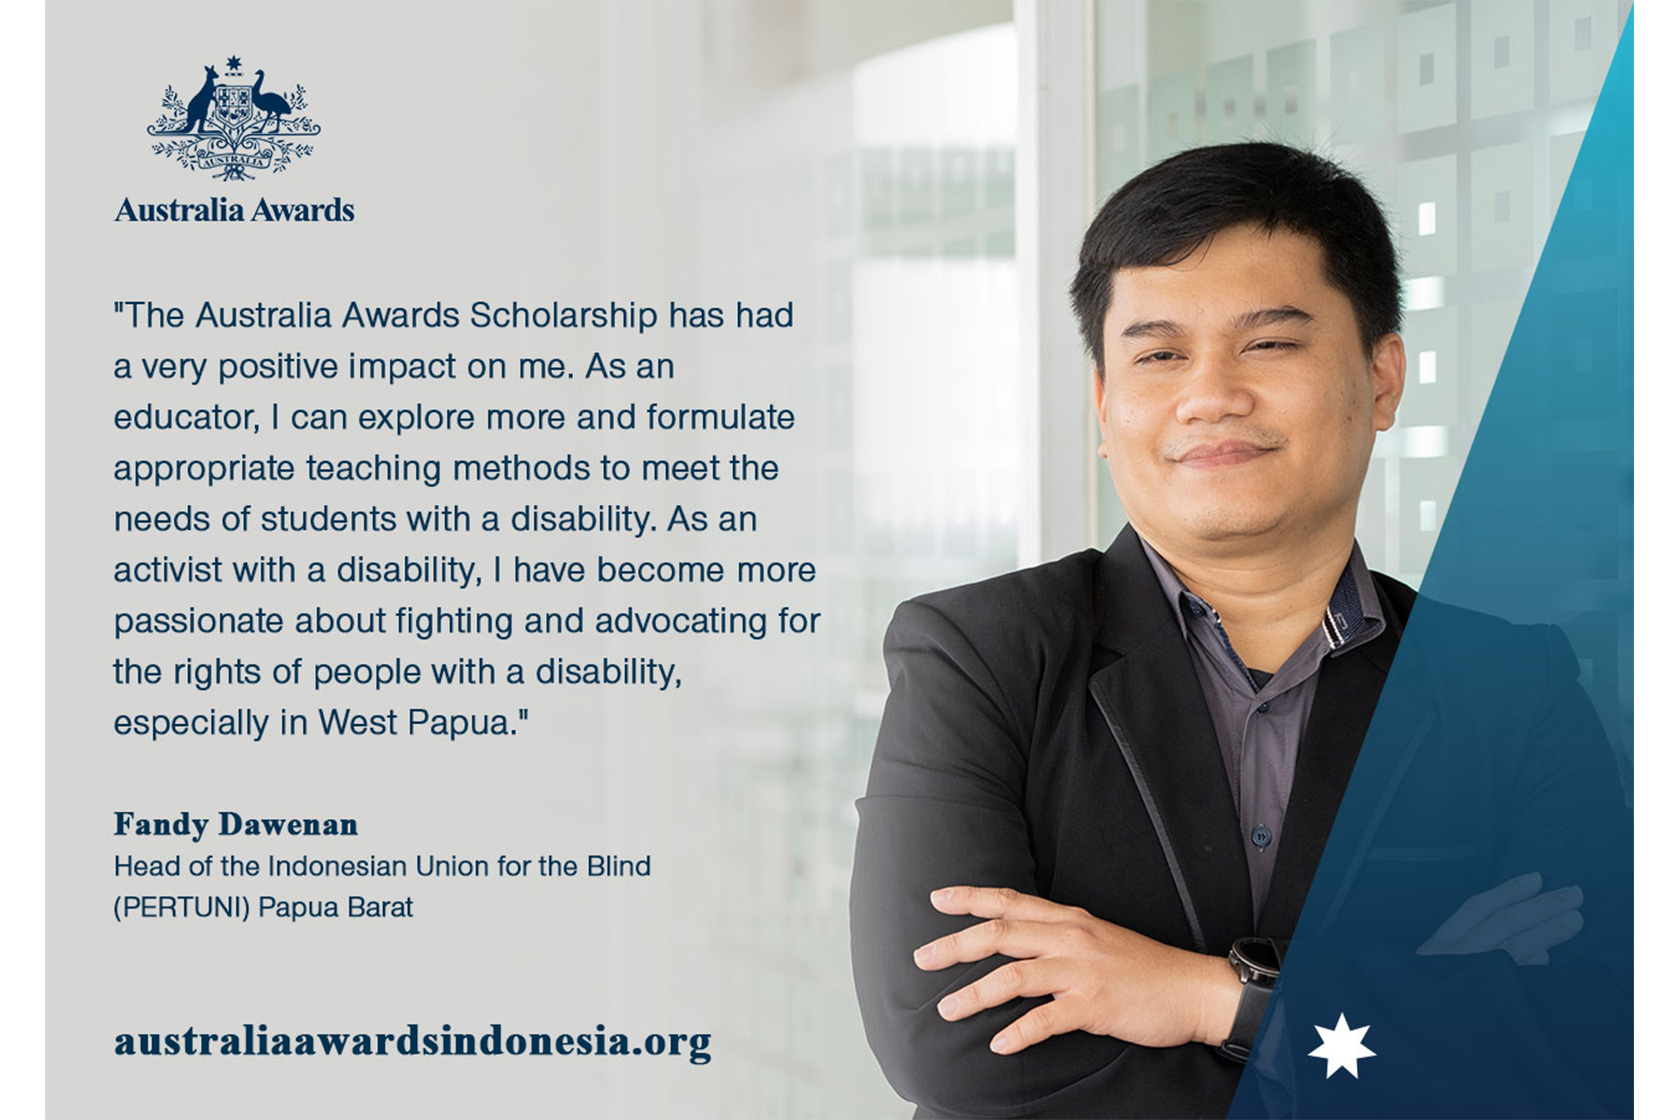 A testimonial from Fandy Dawenan about his experience studying and living in Australia